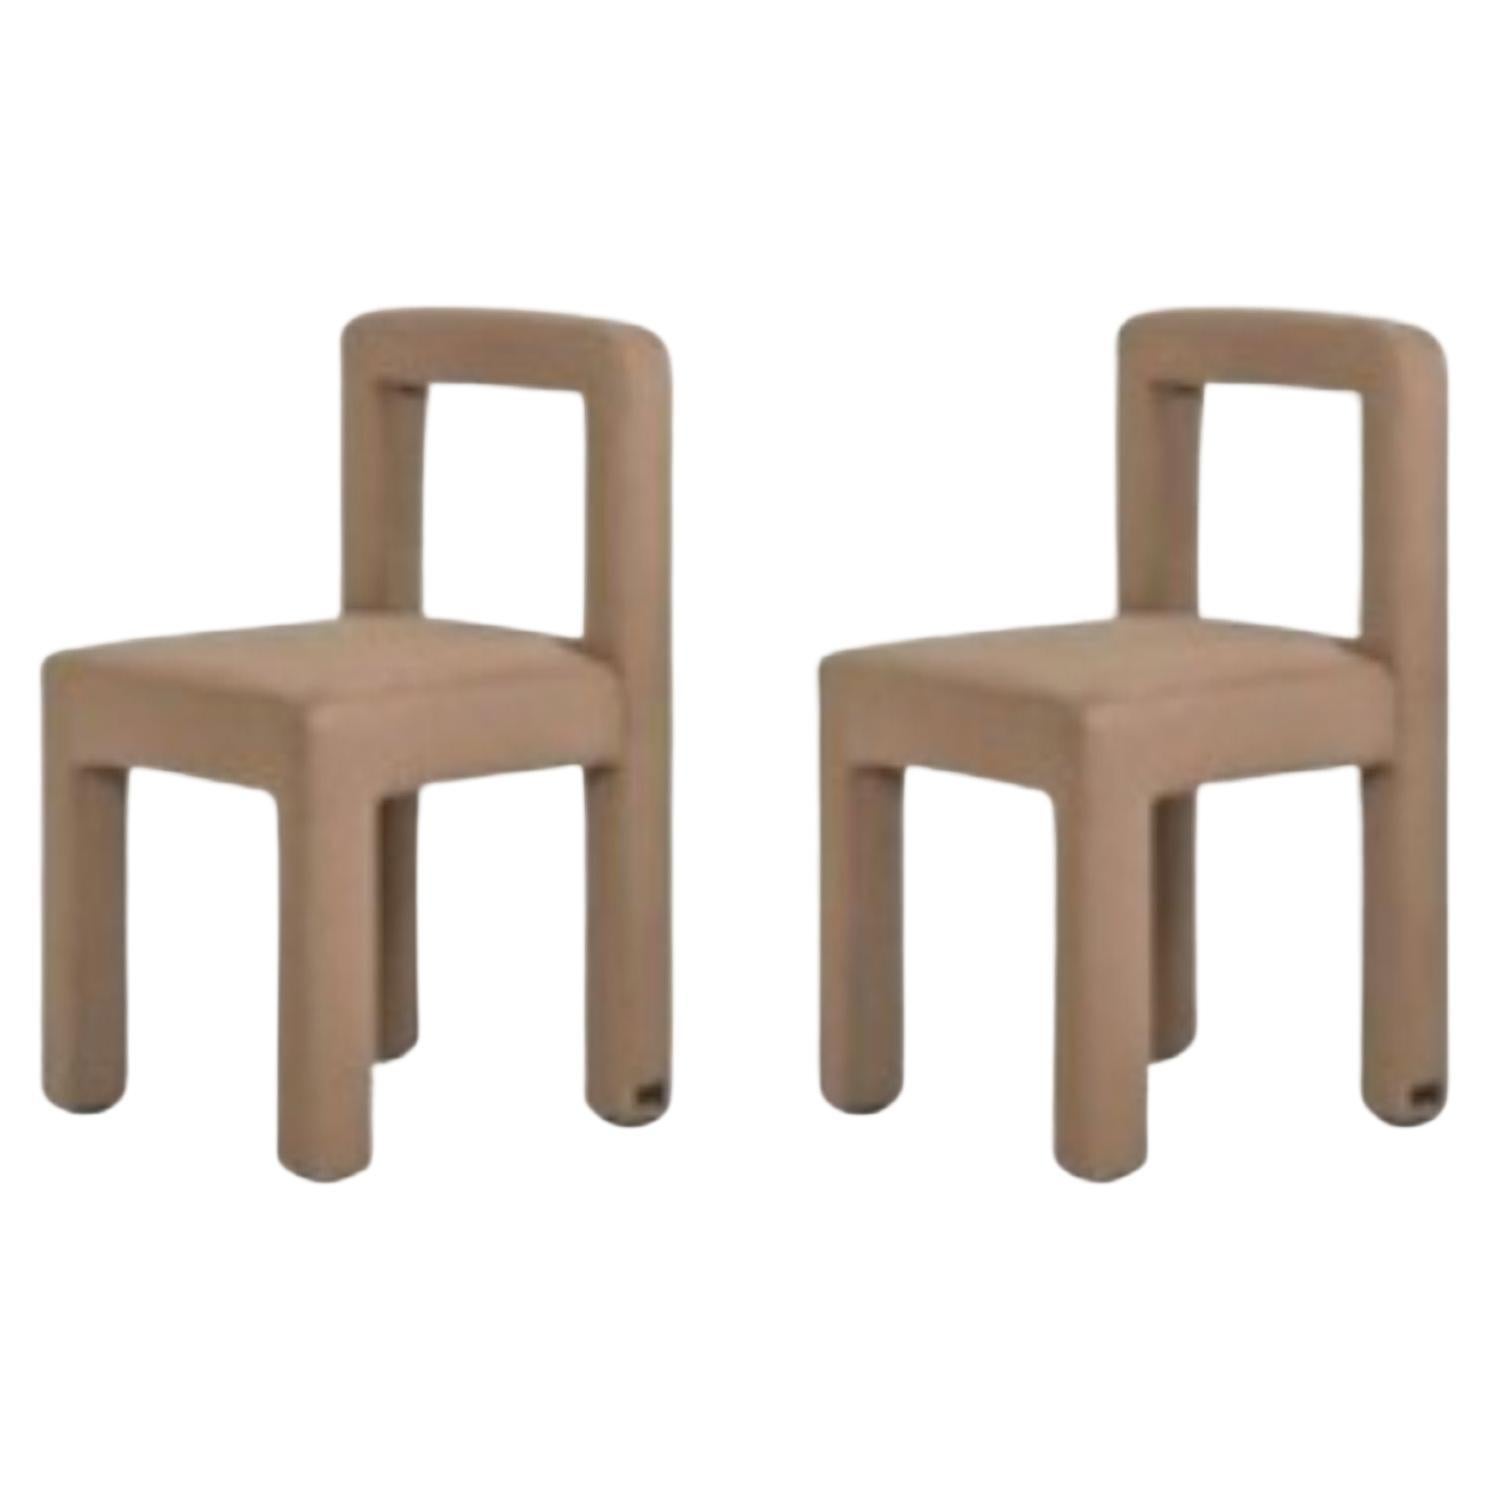 Set of 2 Toptun Chairs by Faina For Sale